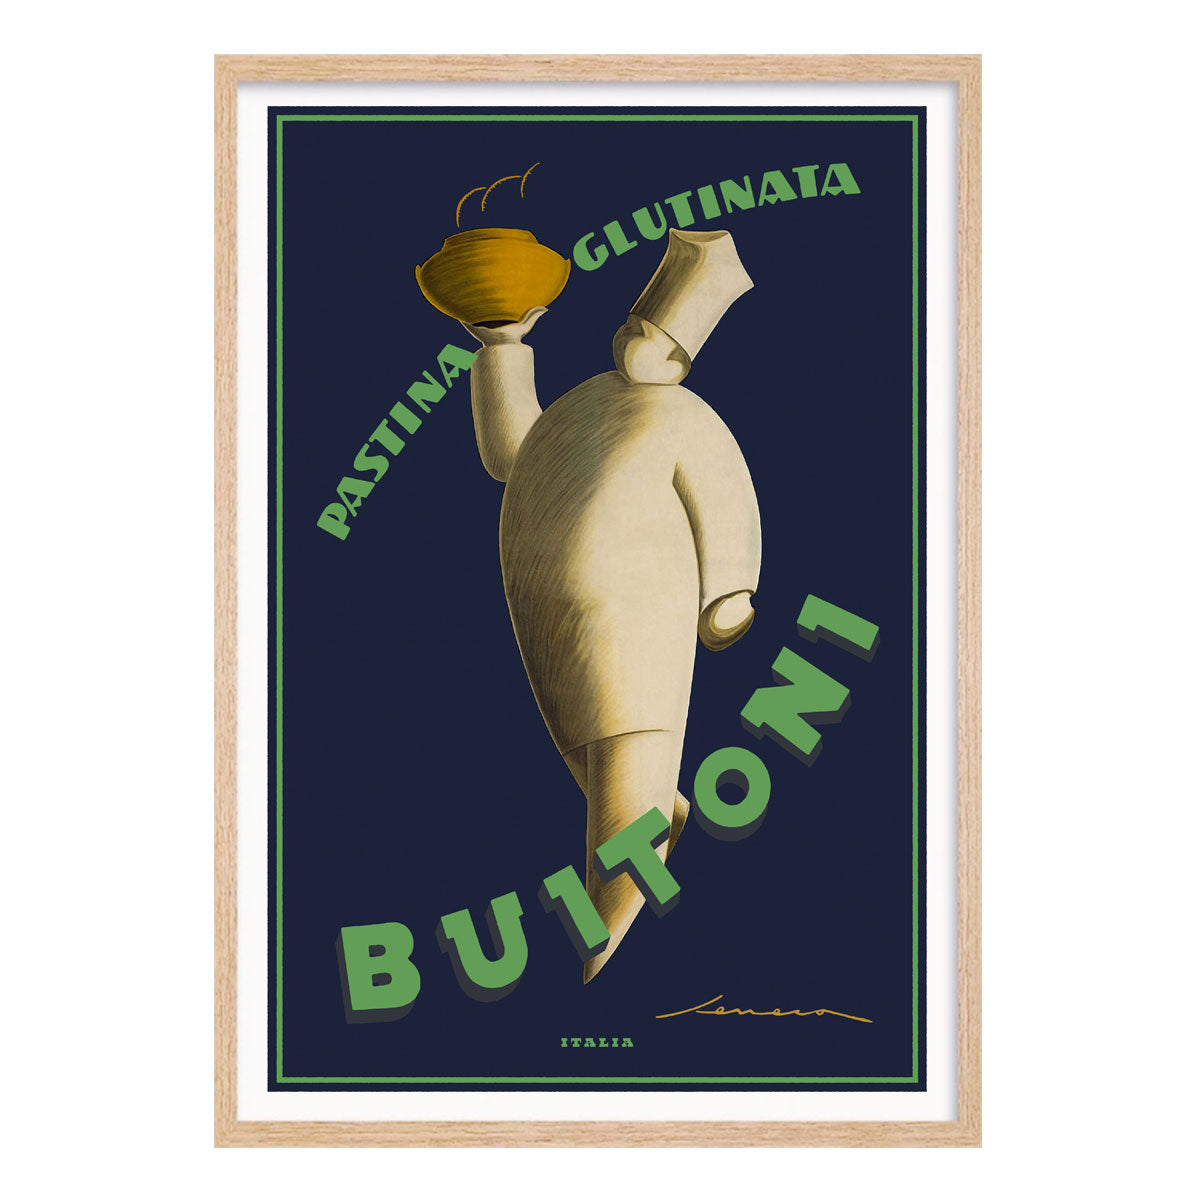 Buitoni Italy retro vintage advertising poster print in oak frame from Places We Luv